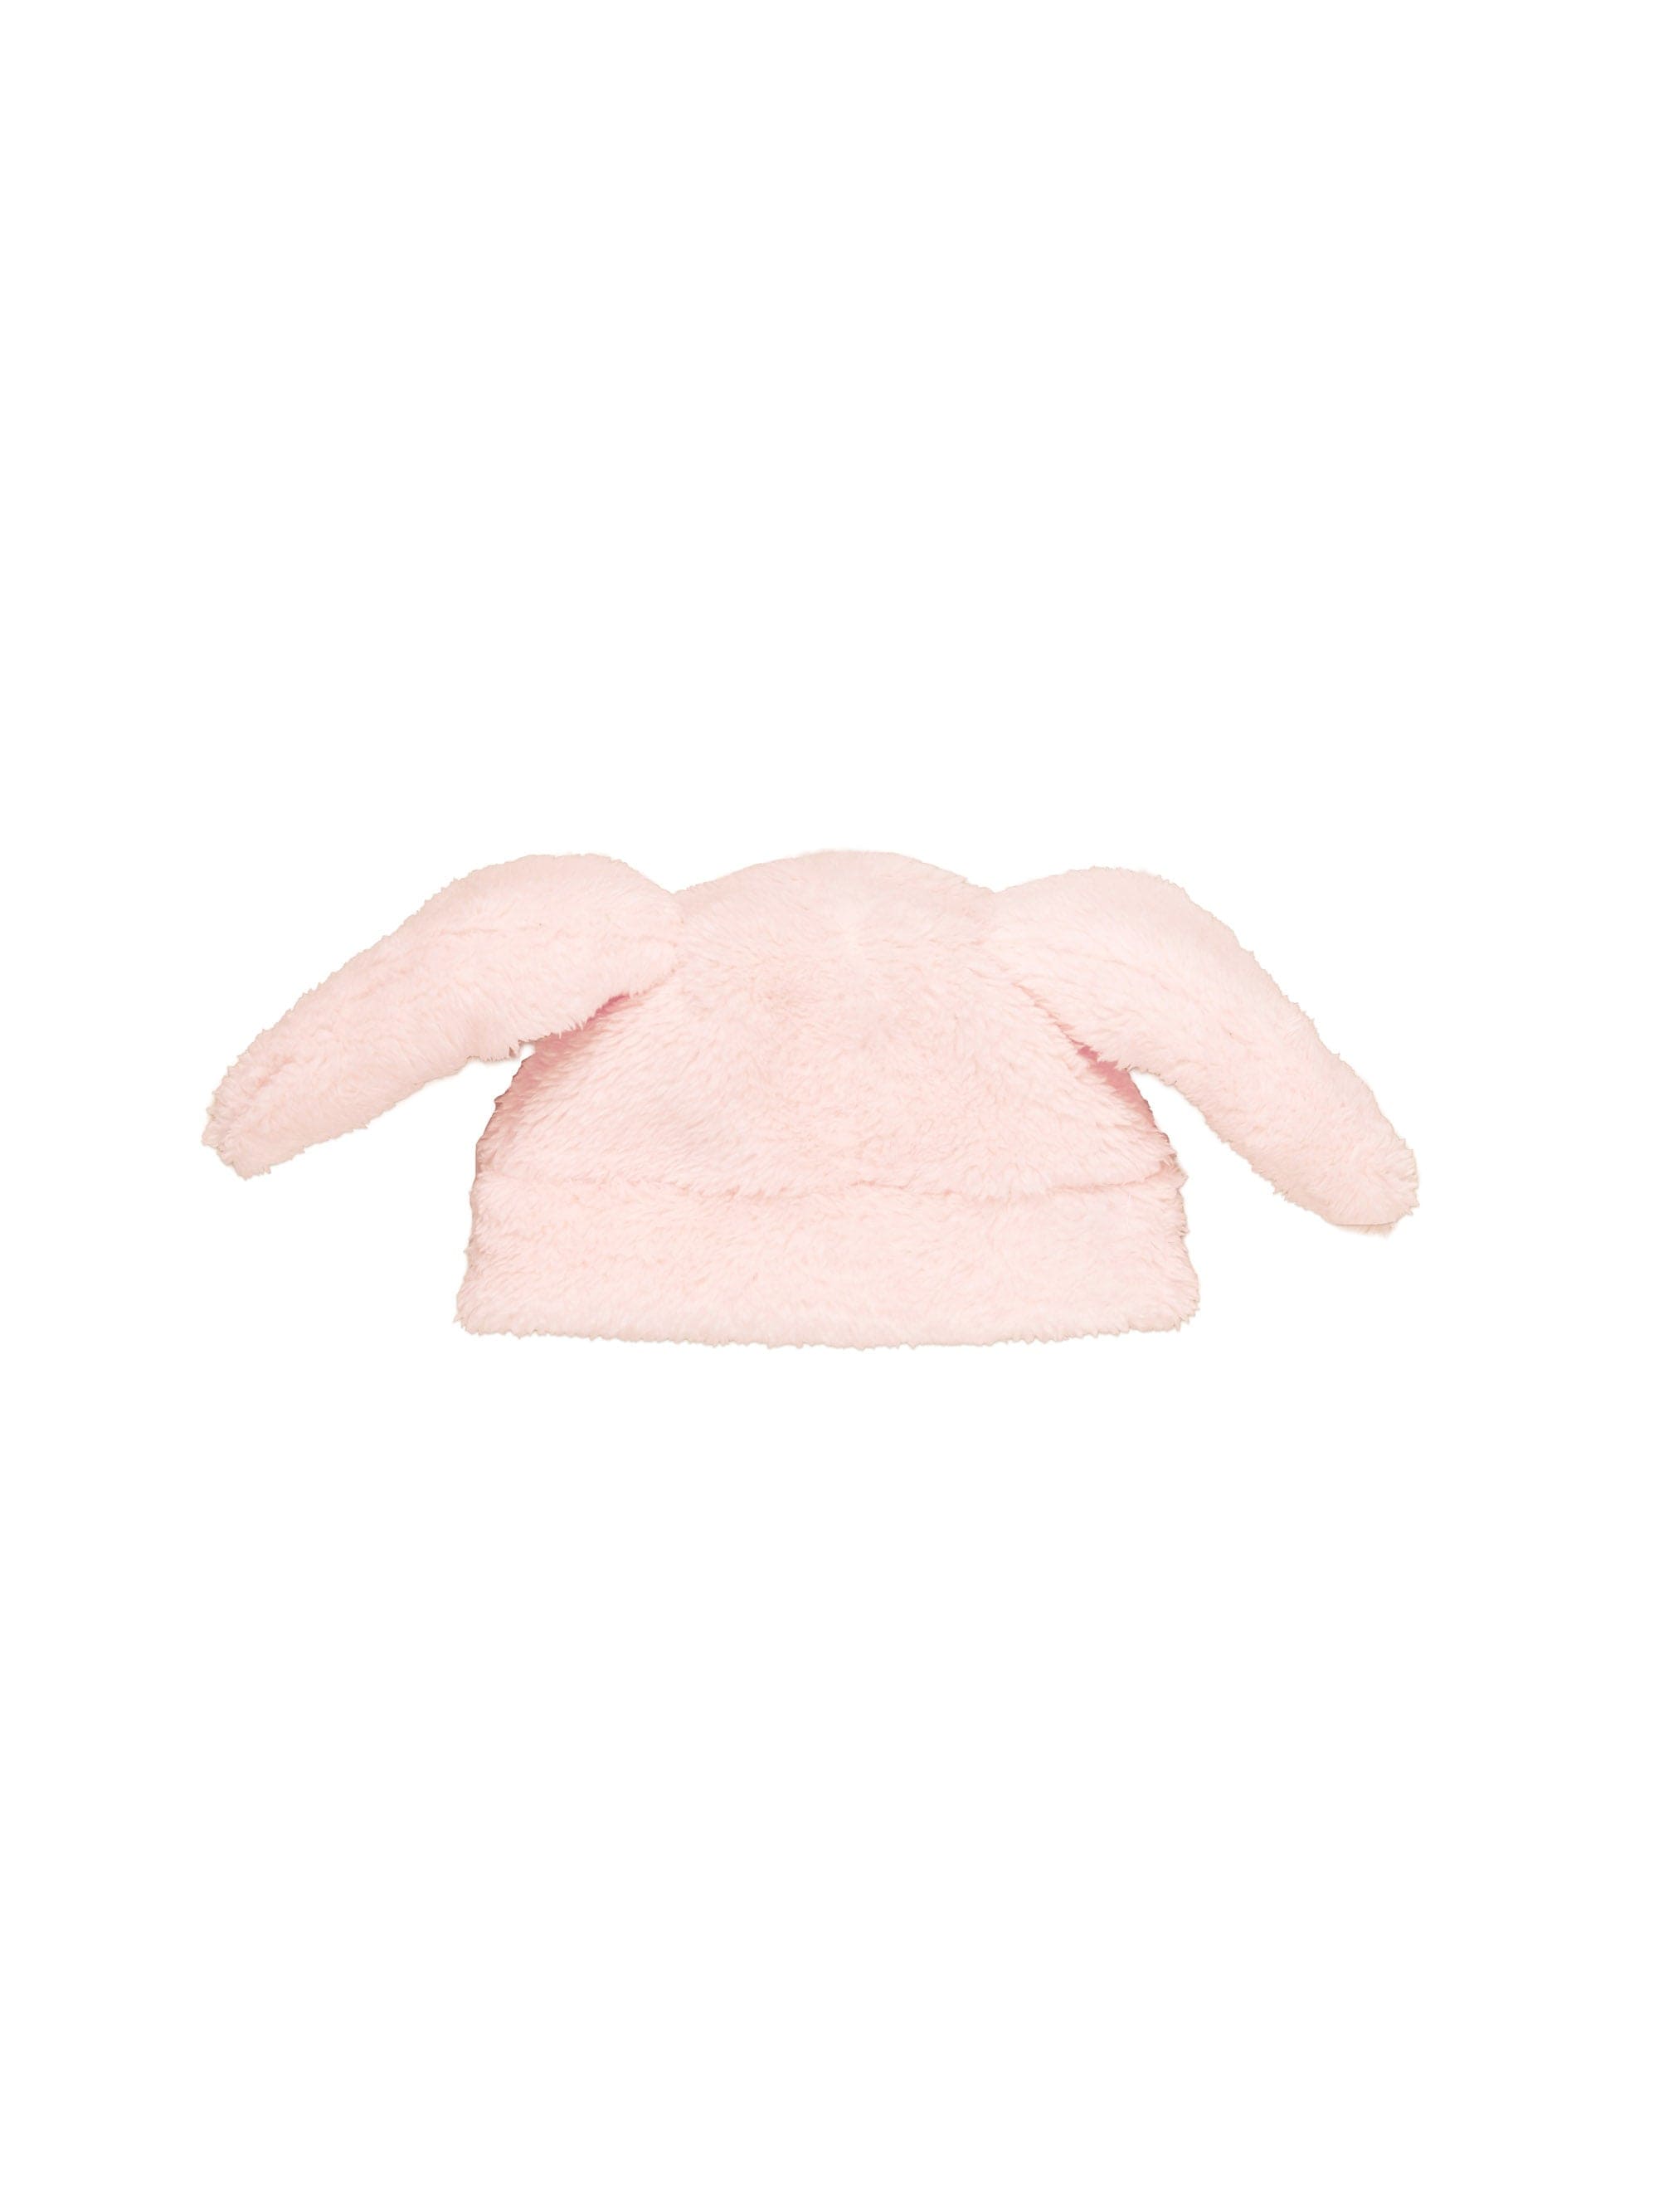 Huxbaby Accessories Hats Bunny Fur Beanie